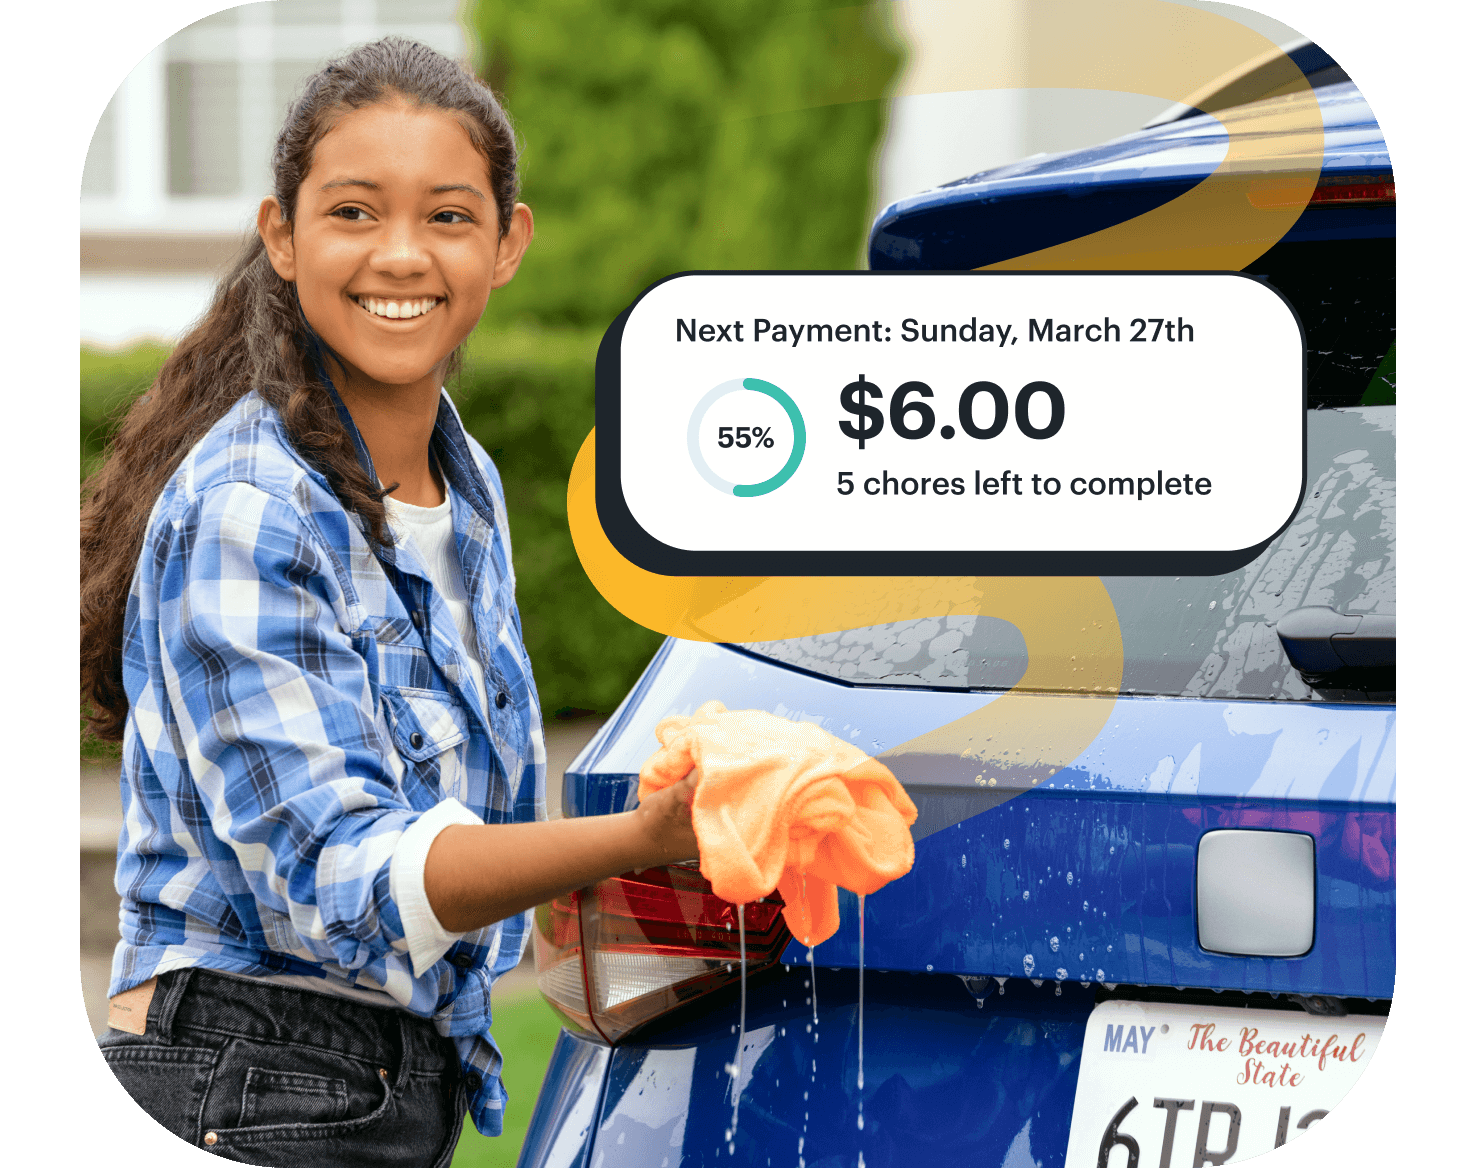 teen girl washing a car with a greenlight chore payment notification near her